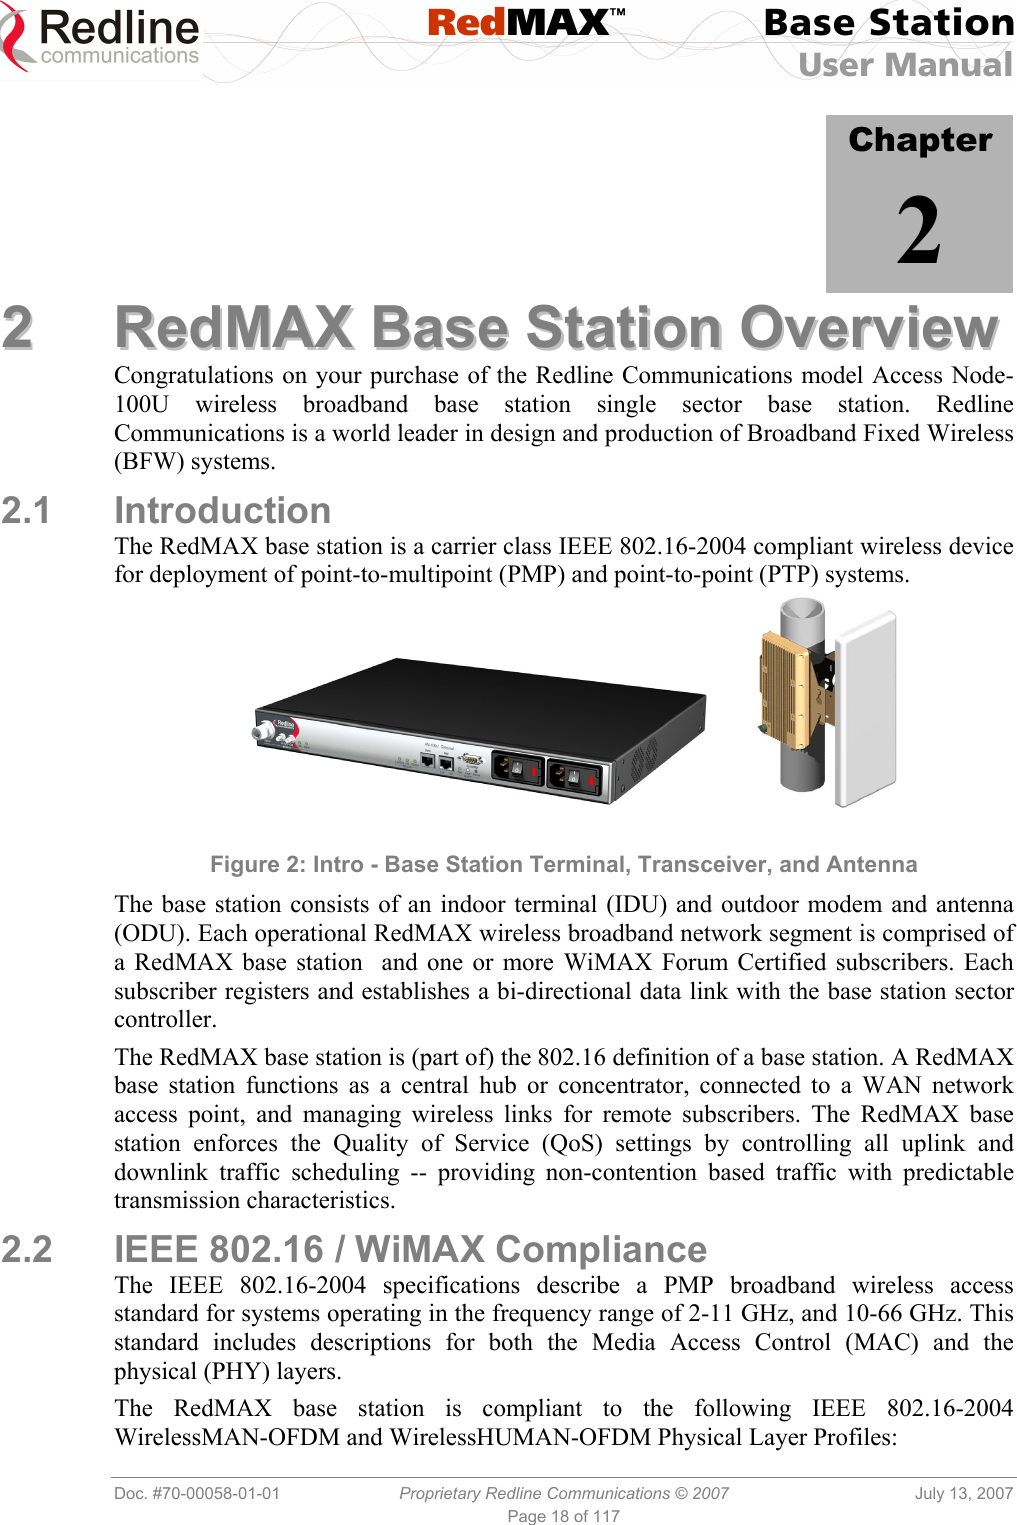  RedMAX™ Base Station User Manual   Doc. #70-00058-01-01  Proprietary Redline Communications © 2007  July 13, 2007 Page 18 of 117            Chapter 2 22  RReeddMMAAXX  BBaassee  SSttaattiioonn  OOvveerrvviieeww  Congratulations on your purchase of the Redline Communications model Access Node-100U wireless broadband base station single sector base station. Redline Communications is a world leader in design and production of Broadband Fixed Wireless (BFW) systems. 2.1 Introduction The RedMAX base station is a carrier class IEEE 802.16-2004 compliant wireless device for deployment of point-to-multipoint (PMP) and point-to-point (PTP) systems.           Figure 2: Intro - Base Station Terminal, Transceiver, and Antenna The base station consists of an indoor terminal (IDU) and outdoor modem and antenna (ODU). Each operational RedMAX wireless broadband network segment is comprised of a RedMAX base station  and one or more WiMAX Forum Certified subscribers. Each subscriber registers and establishes a bi-directional data link with the base station sector controller. The RedMAX base station is (part of) the 802.16 definition of a base station. A RedMAX base station functions as a central hub or concentrator, connected to a WAN network access point, and managing wireless links for remote subscribers. The RedMAX base station enforces the Quality of Service (QoS) settings by controlling all uplink and downlink traffic scheduling -- providing non-contention based traffic with predictable transmission characteristics. 2.2  IEEE 802.16 / WiMAX Compliance The IEEE 802.16-2004 specifications describe a PMP broadband wireless access standard for systems operating in the frequency range of 2-11 GHz, and 10-66 GHz. This standard includes descriptions for both the Media Access Control (MAC) and the physical (PHY) layers.  The RedMAX base station is compliant to the following IEEE 802.16-2004 WirelessMAN-OFDM and WirelessHUMAN-OFDM Physical Layer Profiles: 